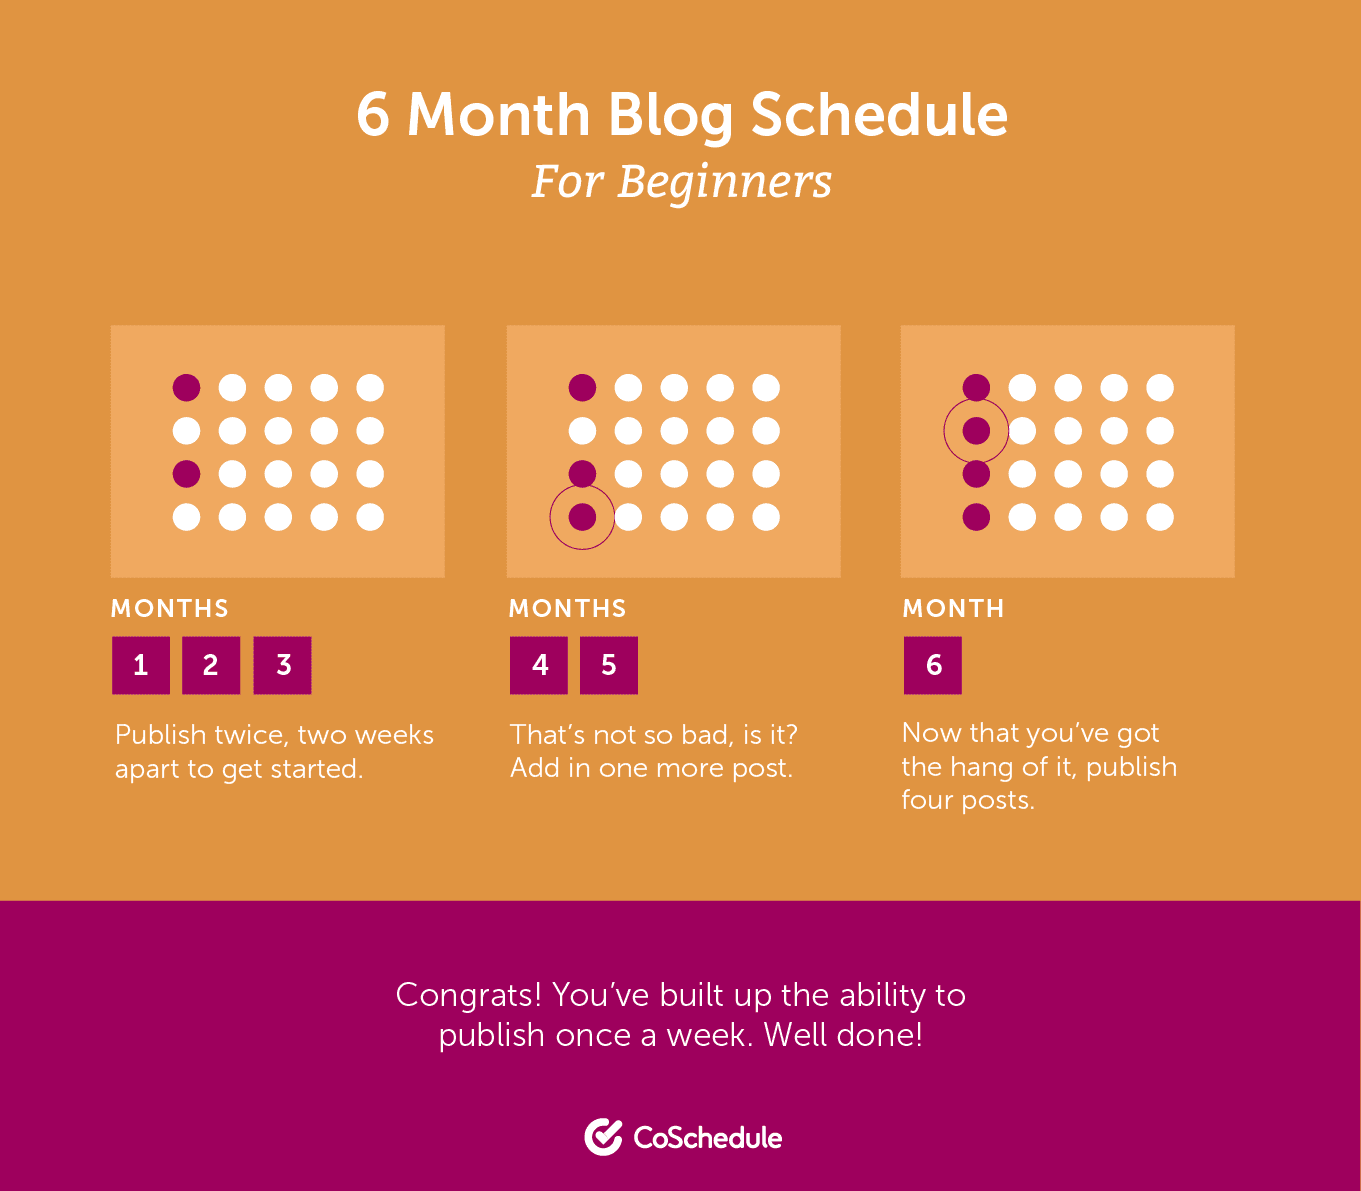 6-Month Blog Schedule for Beginners